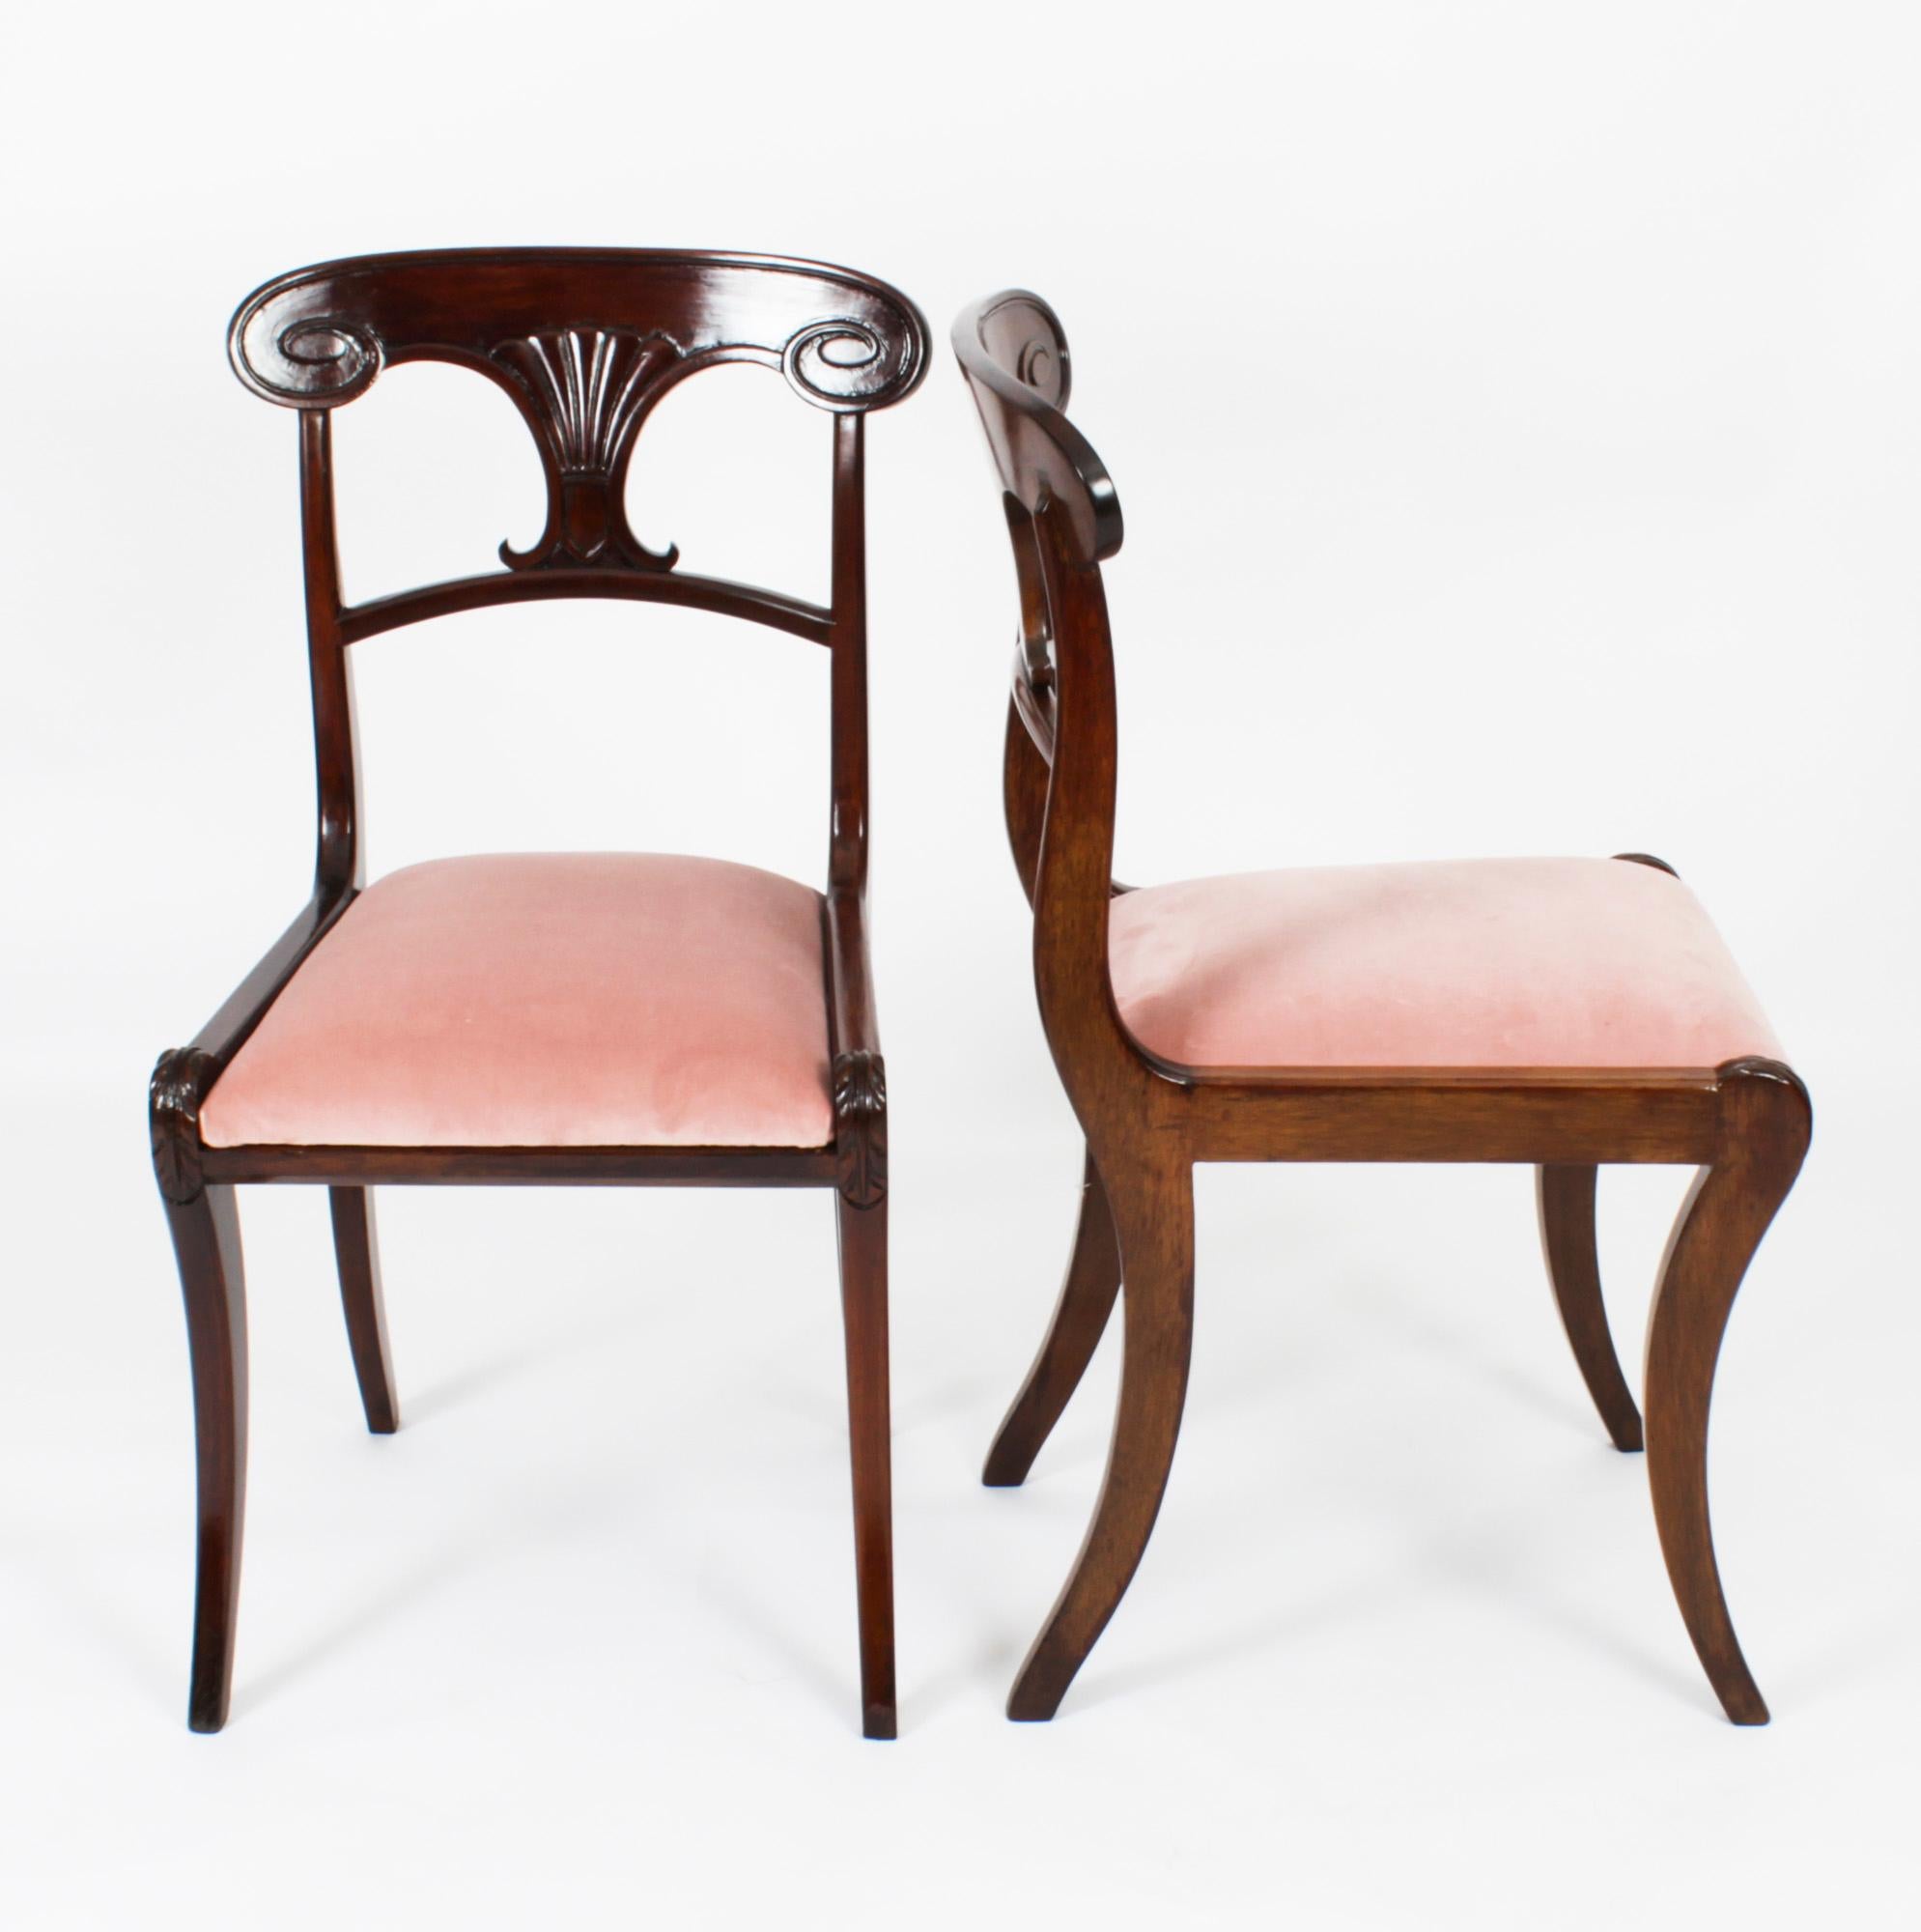 This is a fabulous set of twelve antique English Regency Bar Back dining chairs, Circa 1830 in date.
 
The set comprises twelve chairs masterfully crafted in beautiful solid flame mahogany. They each have elegant scroll carved bar backs with fan